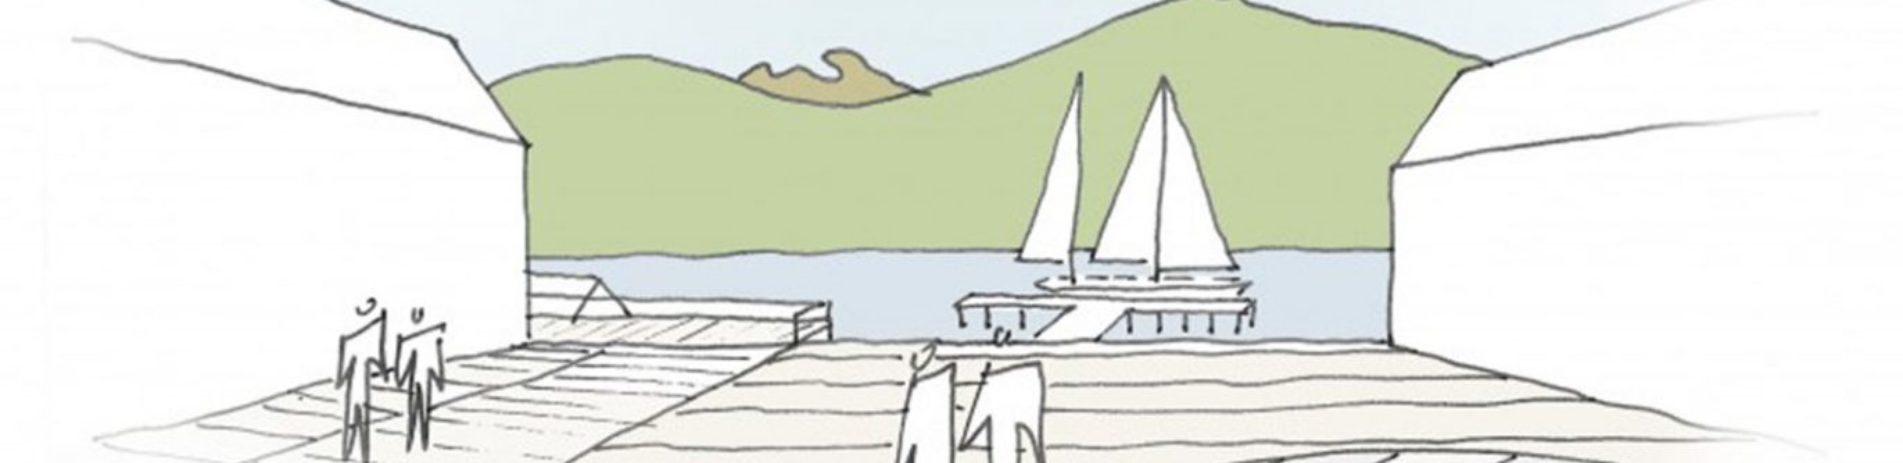 illustration-with-pier-yacht-people-and-mountains